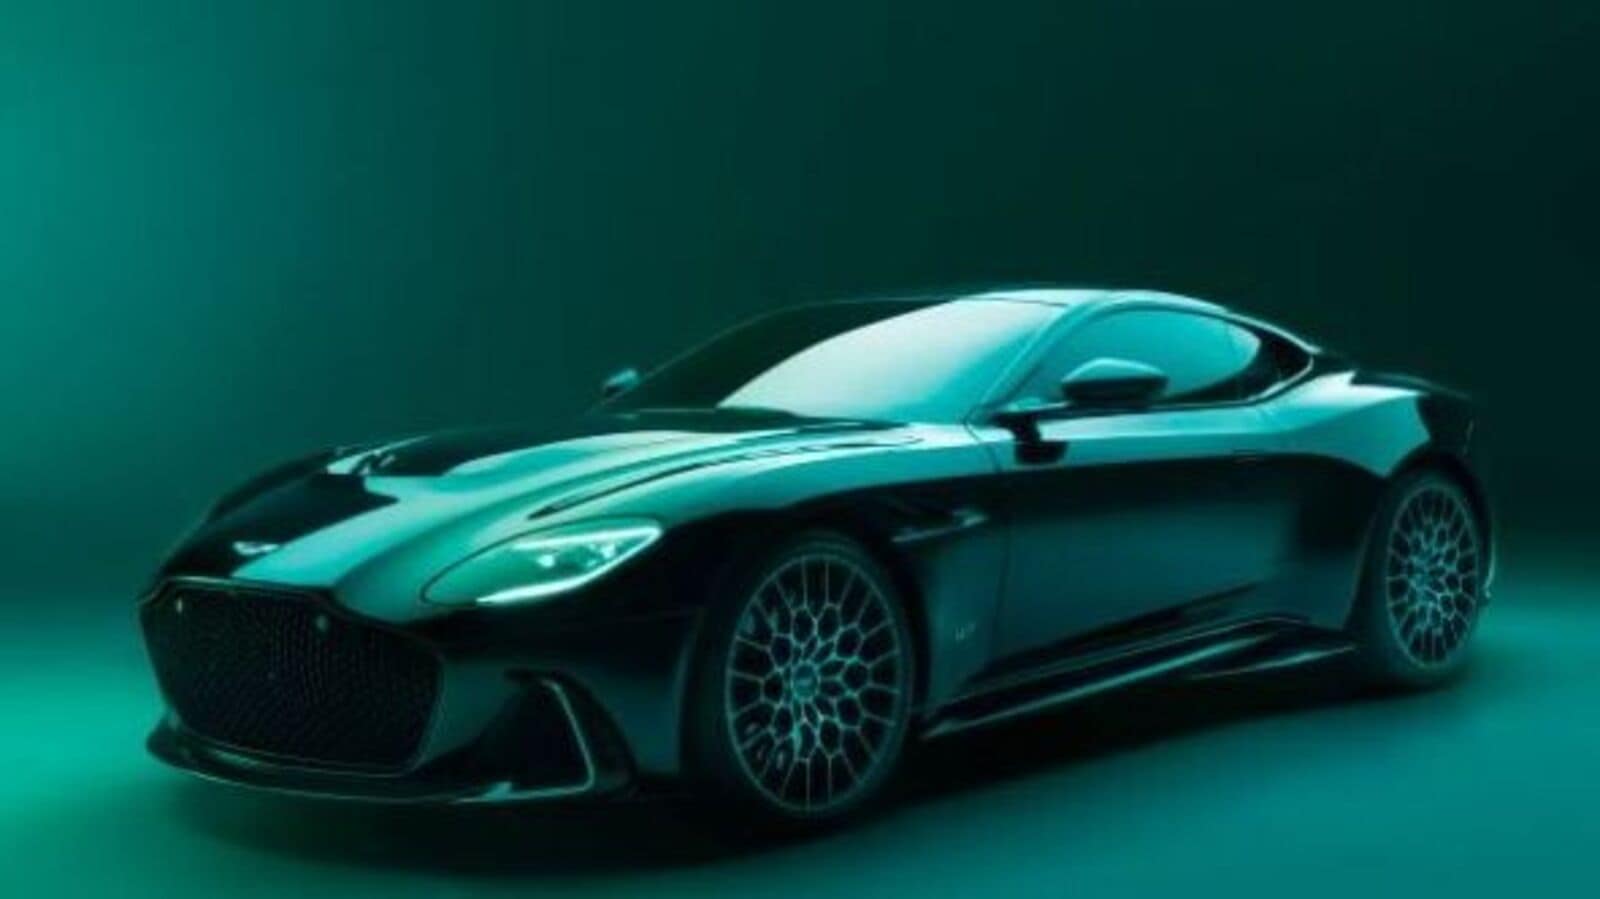 Aston Martin to launch eight new sports cars by 2026, plans an ultra GT